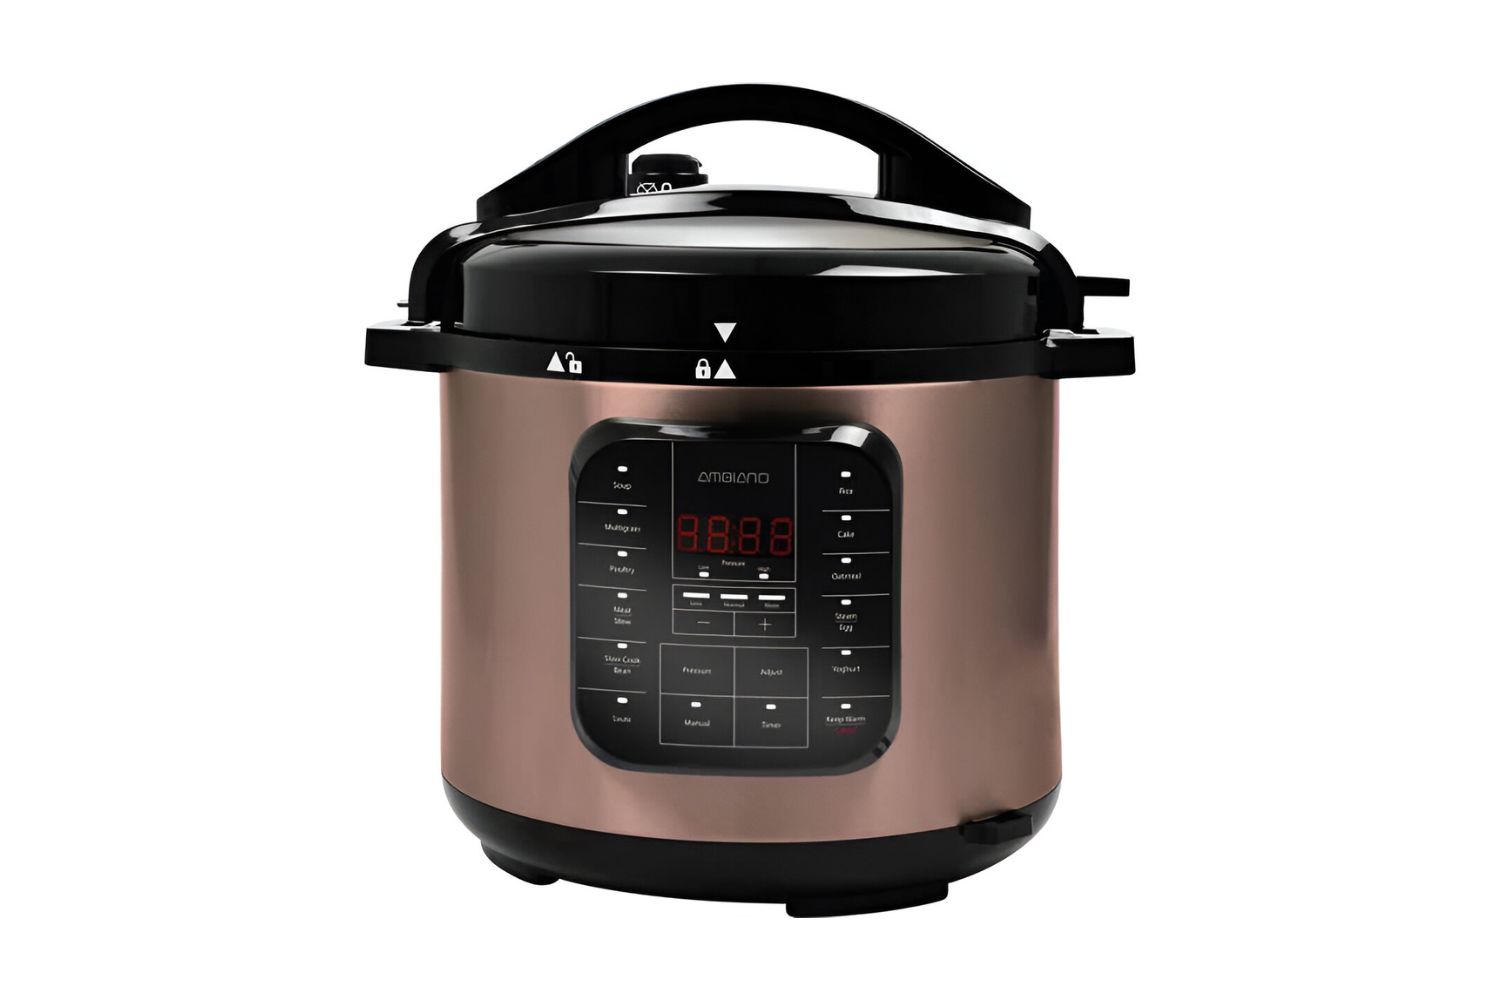 How To Heat Milk In The Ambiano Electric Pressure Cooker Without Scorching